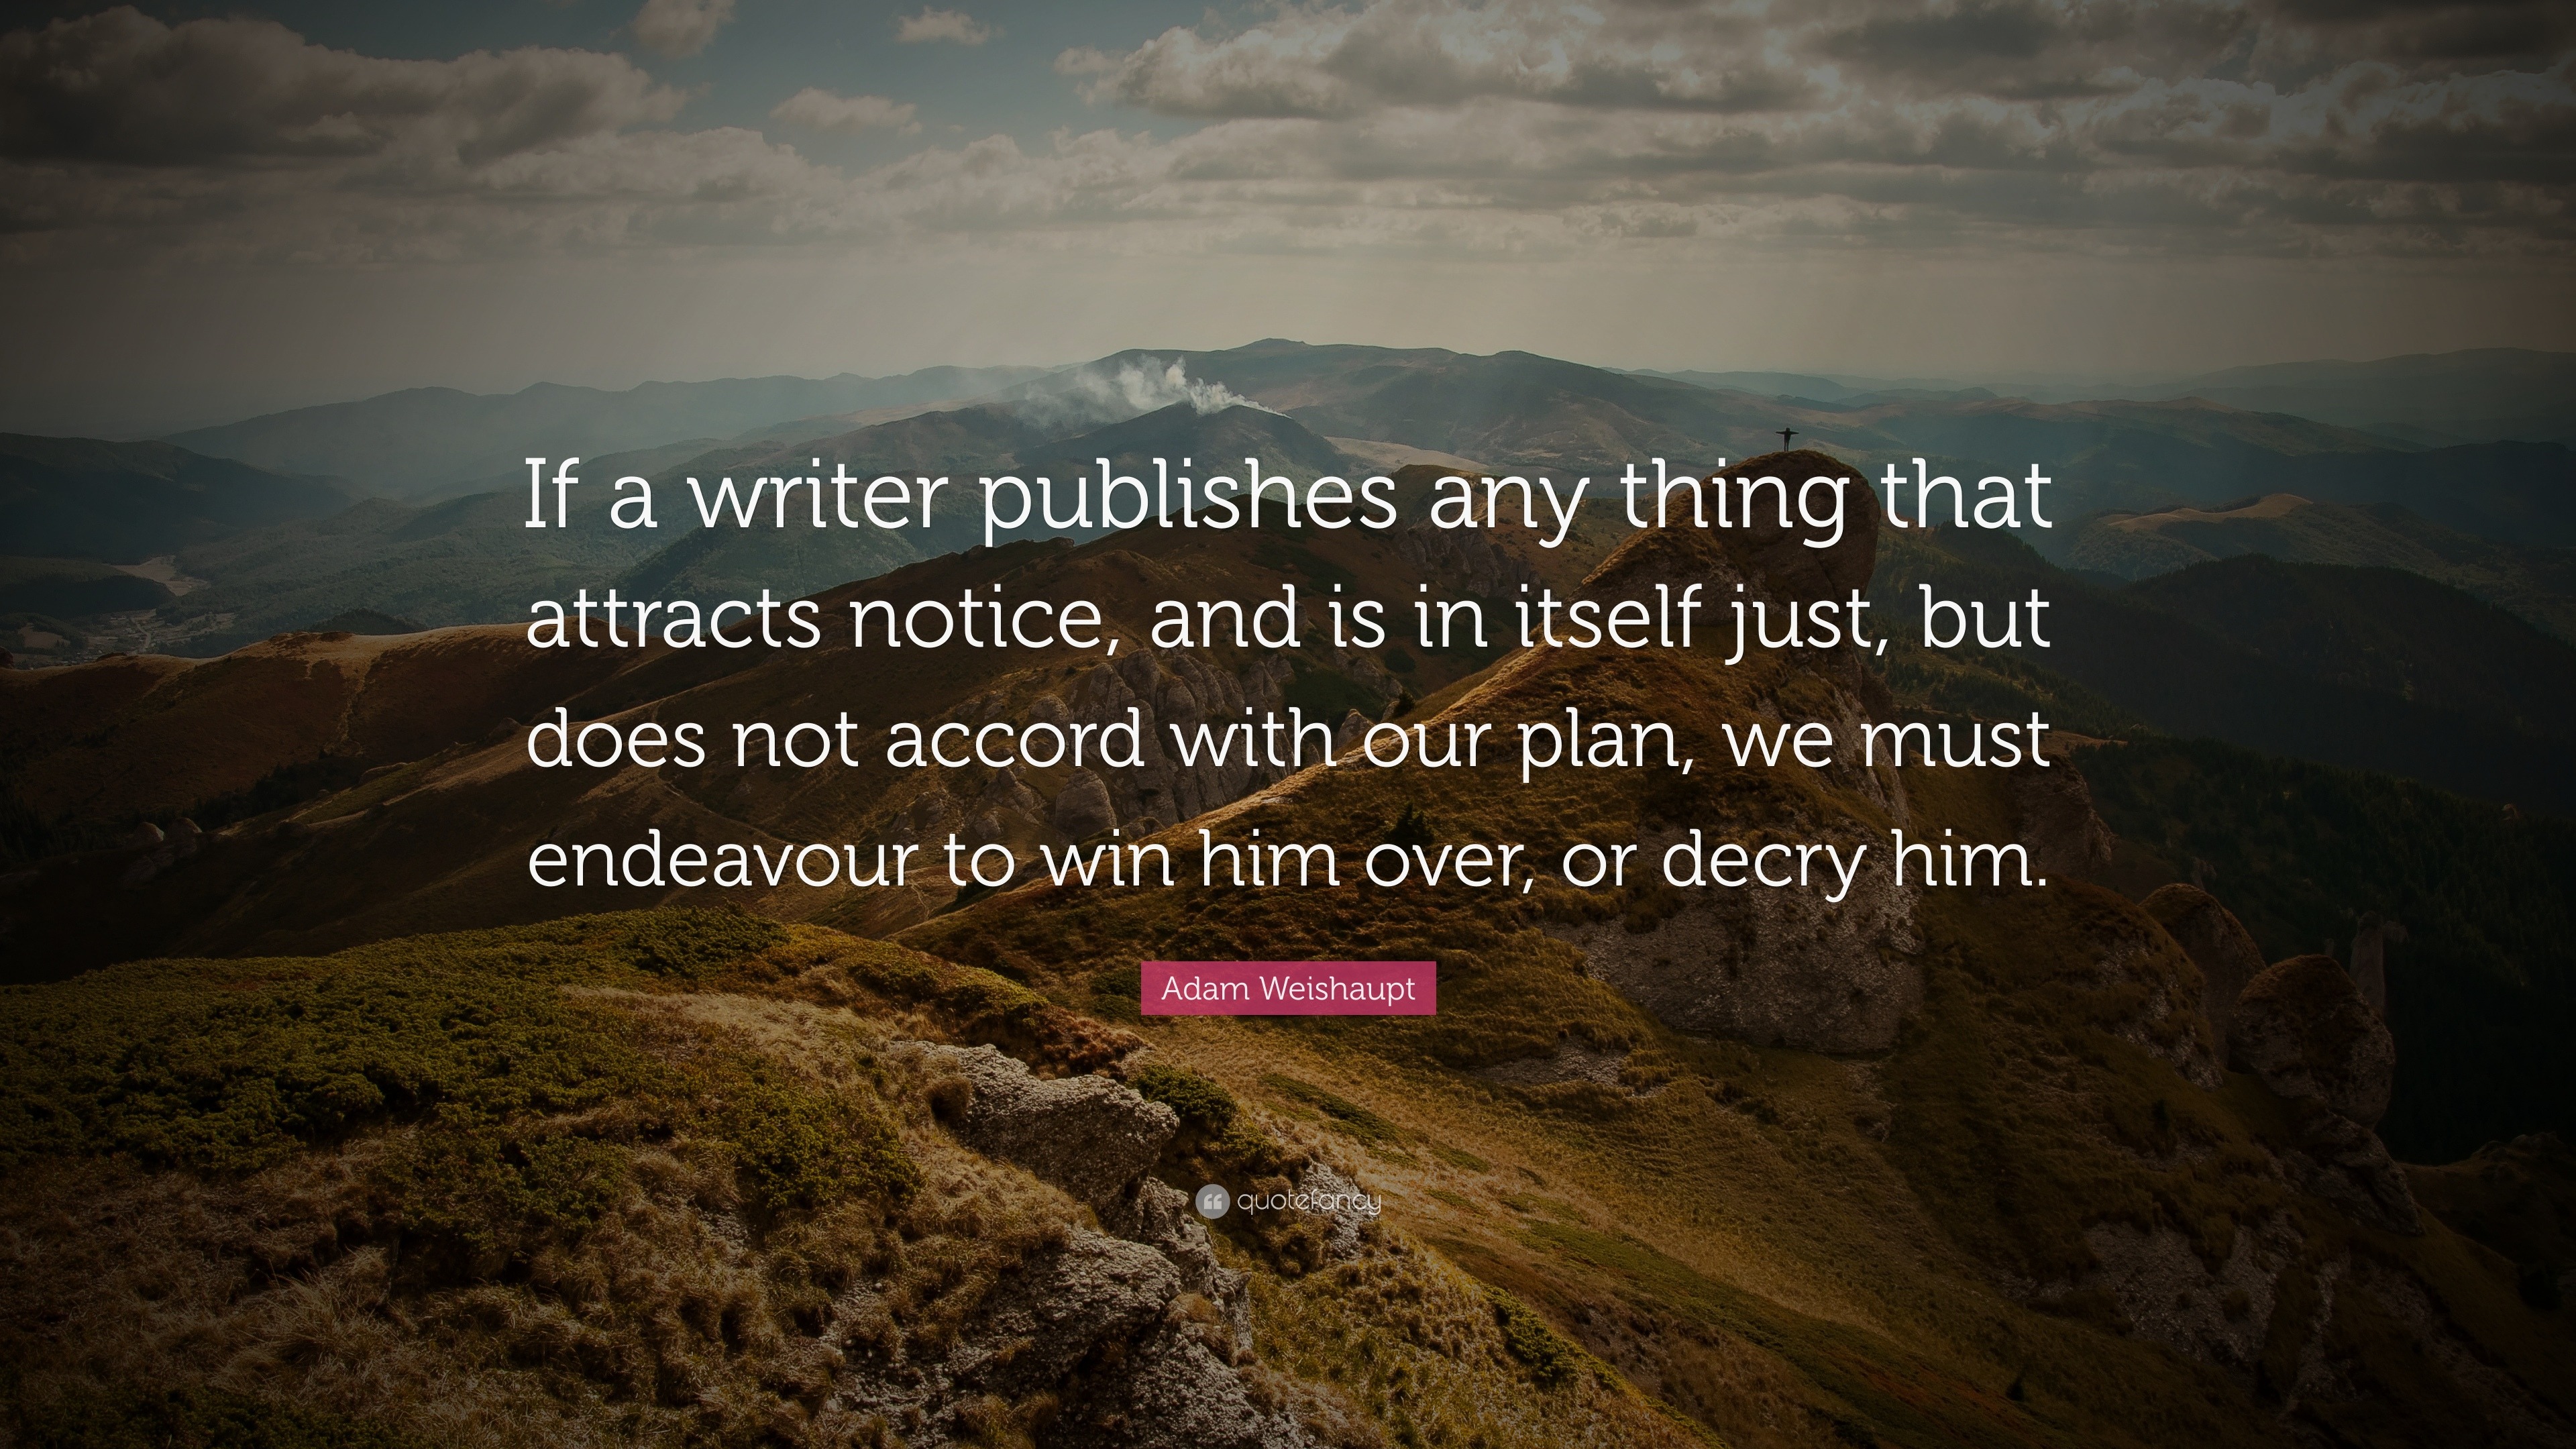 Adam Weishaupt Quote: “If a writer publishes any thing that attracts ...